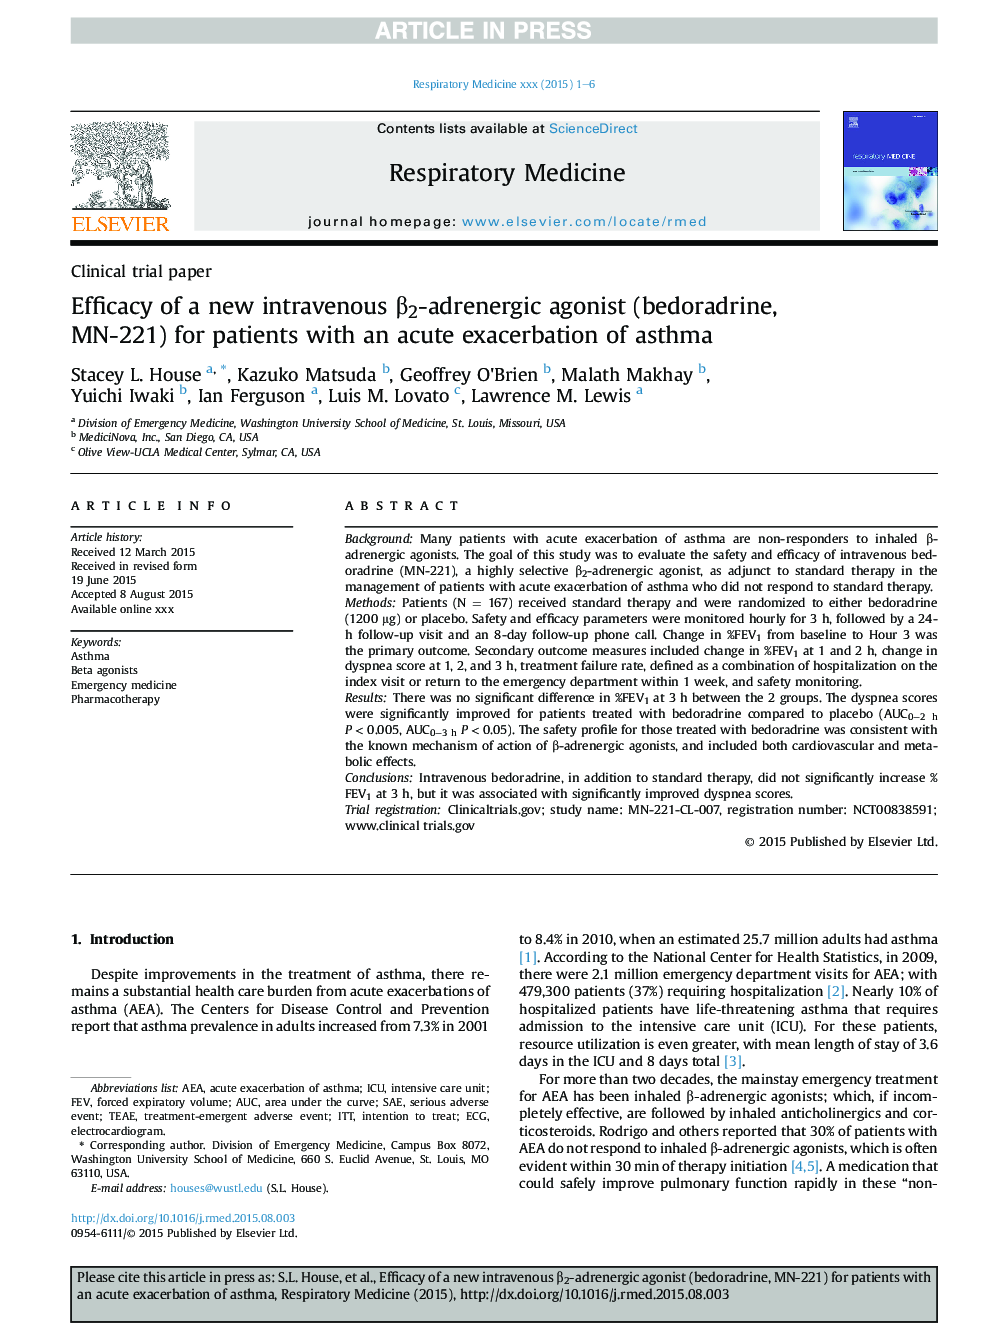 Efficacy of a new intravenous Î²2-adrenergic agonist (bedoradrine, MN-221) for patients with an acute exacerbation of asthma